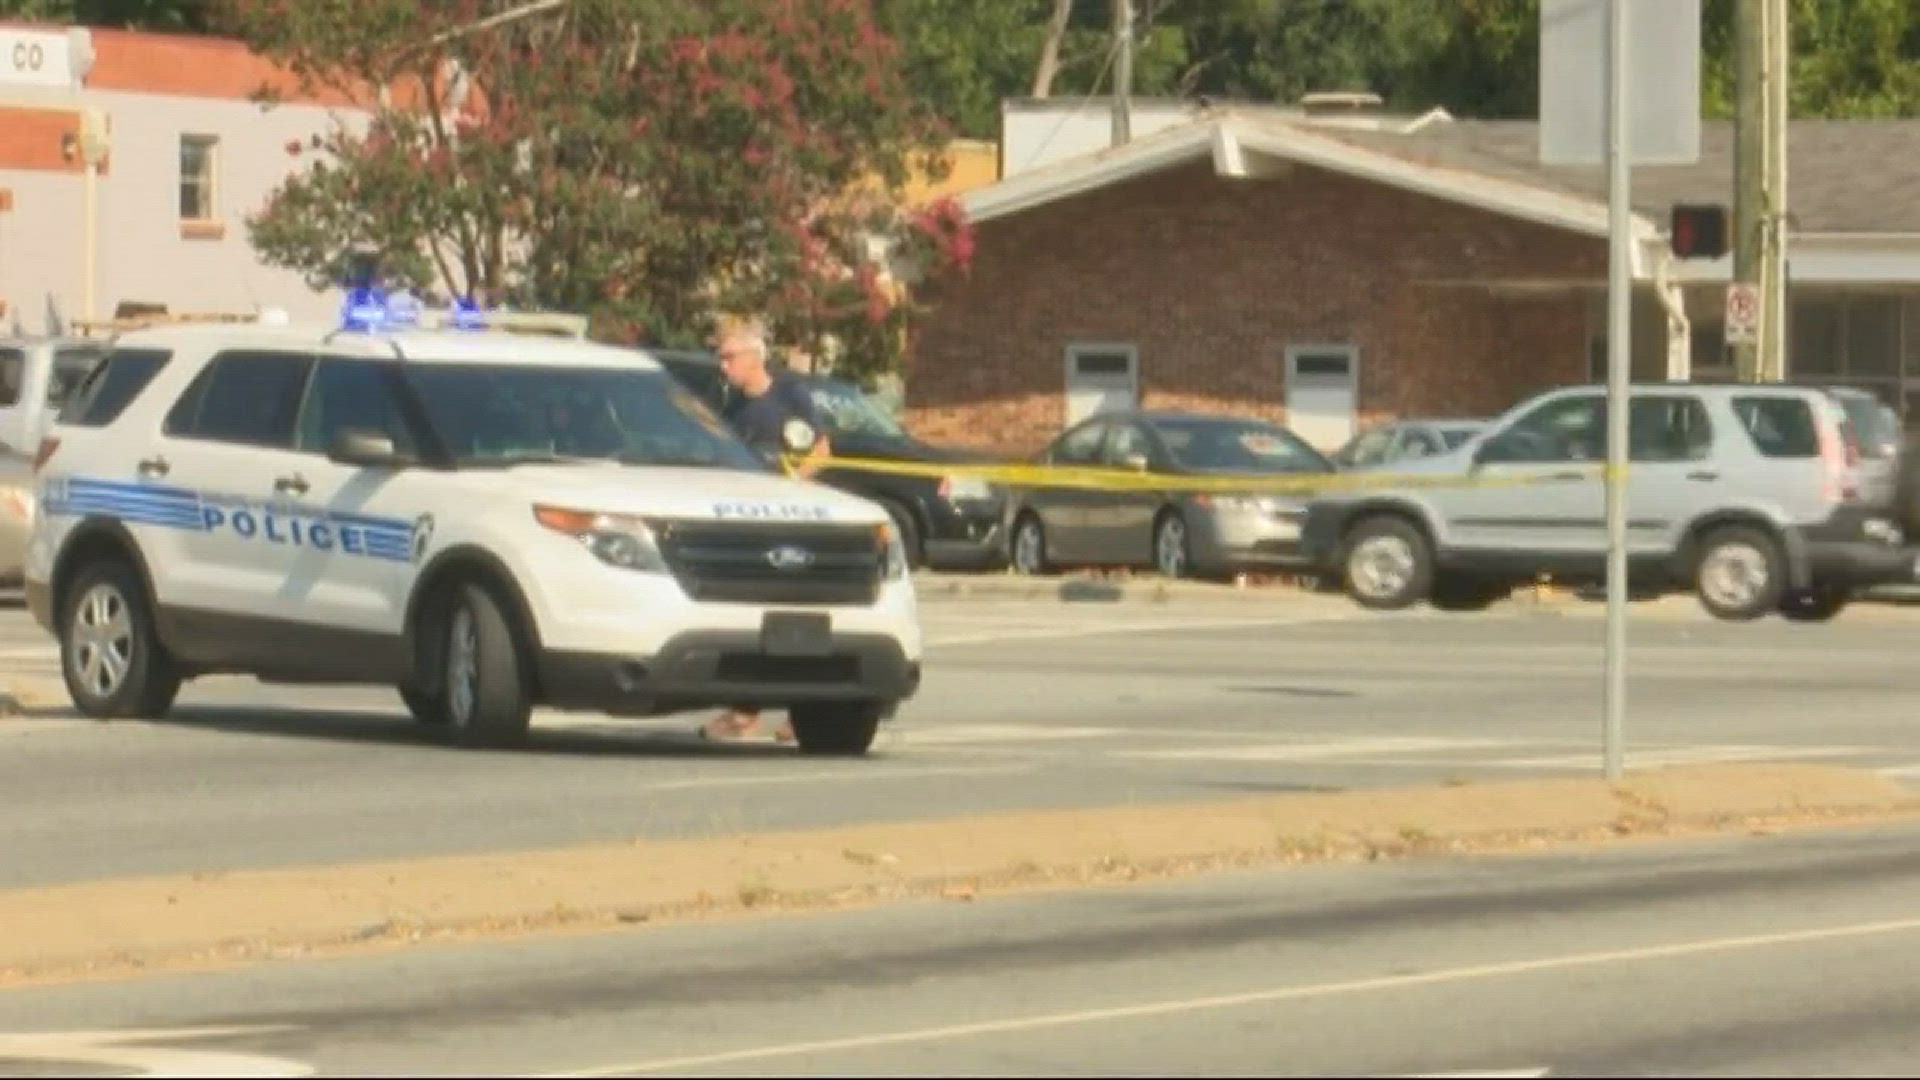 A pedestrian was struck in southeast Charlotte Sunday afternoon. CMPD is looking for the hit-and-run driver.